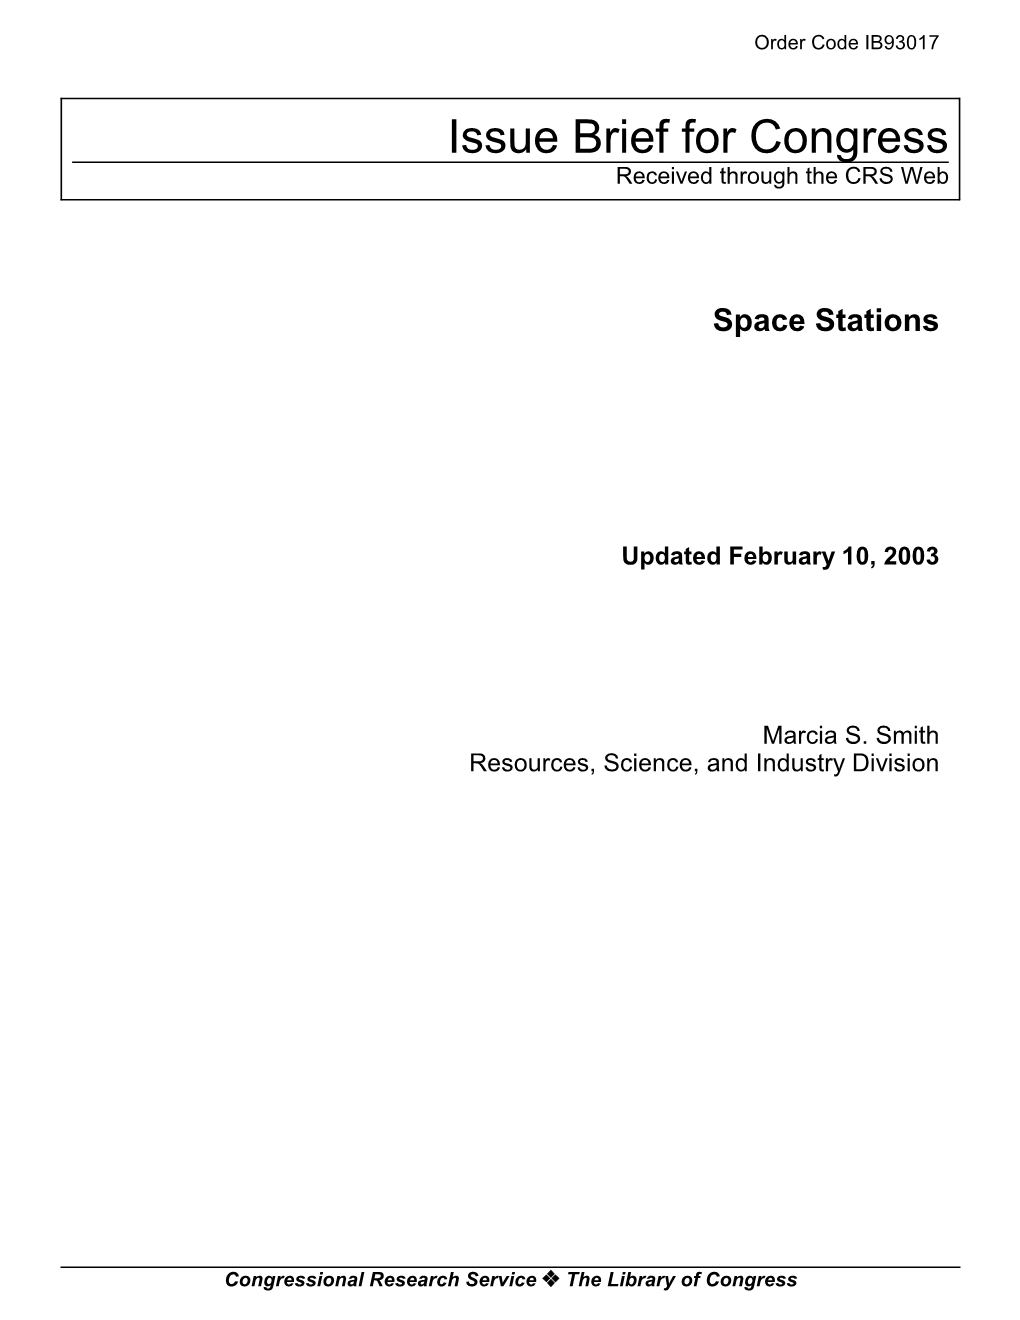 Pdf], Concluding That NASA’S Estimate for FY2002-2006 of $8.3 Billion to Finish the U.S